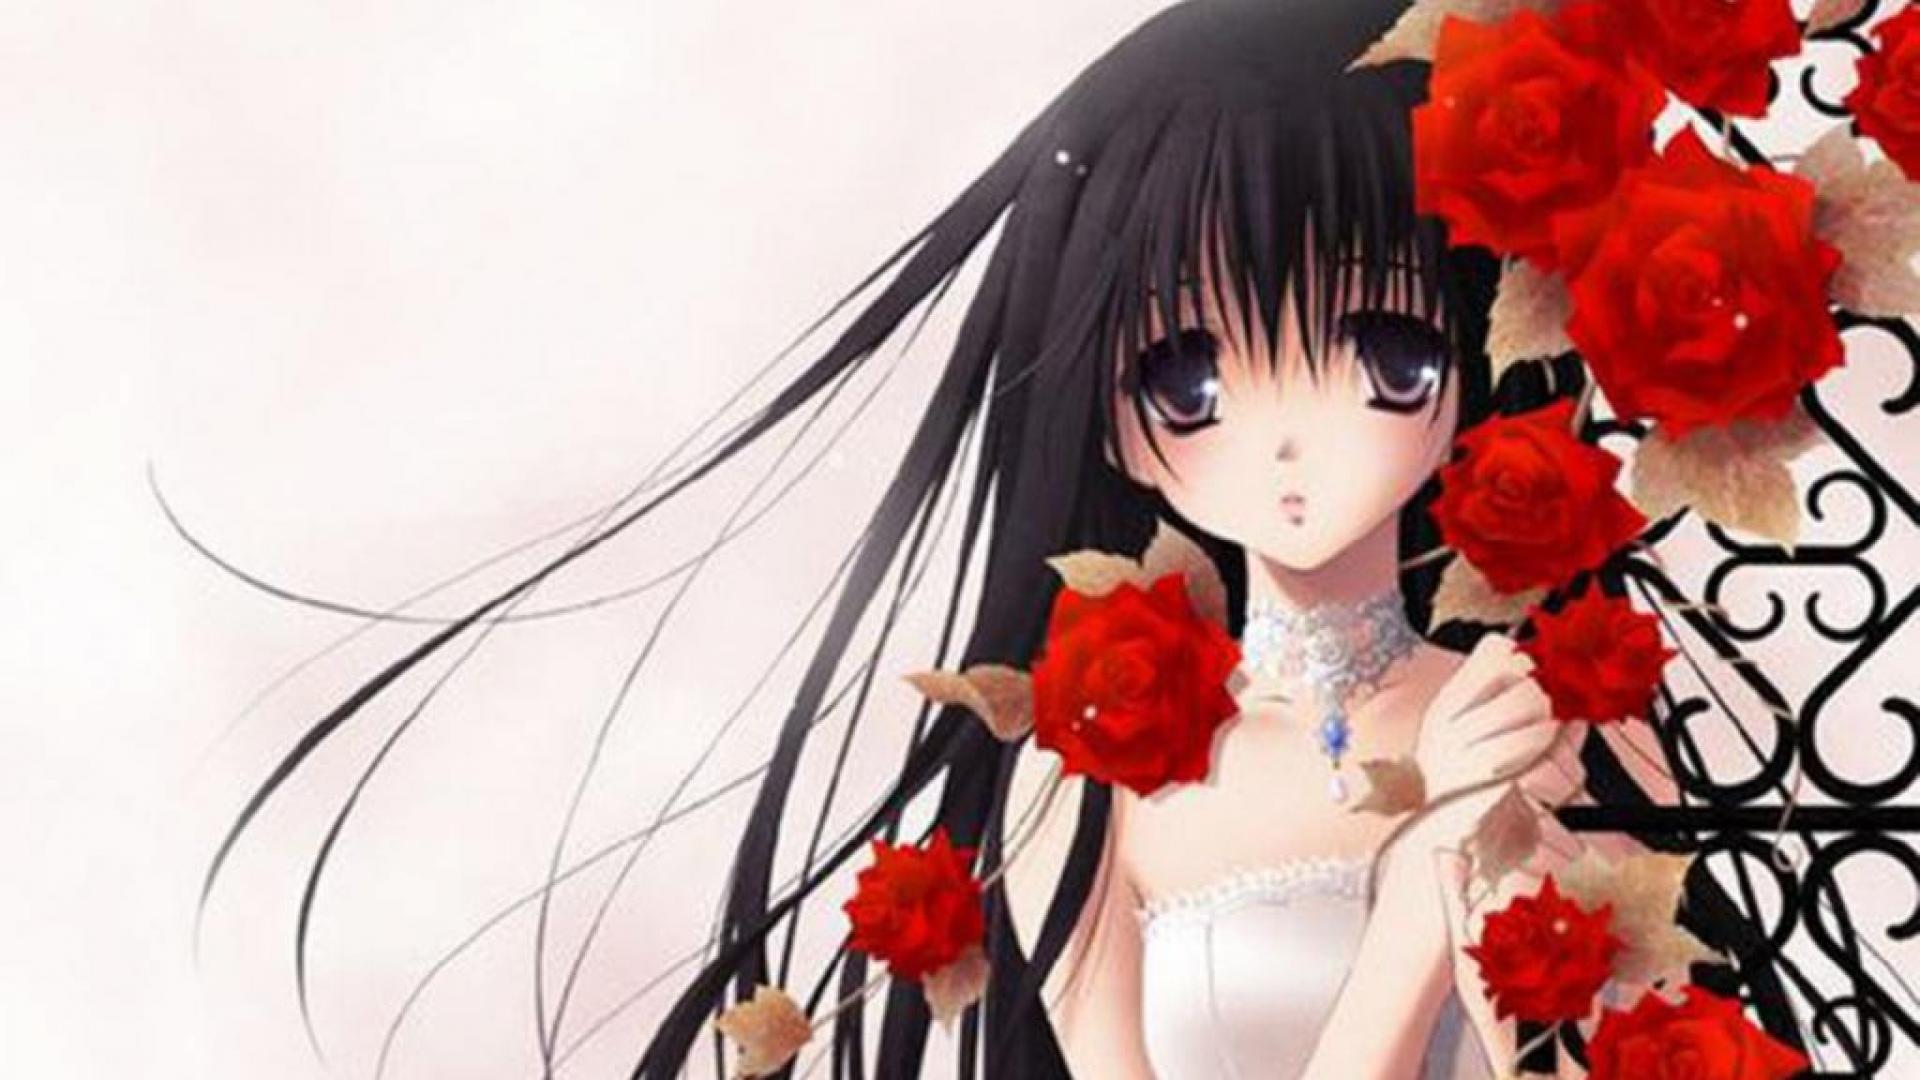 Roses Anime - Wallpaper, High Definition, High Quality, Widescreen